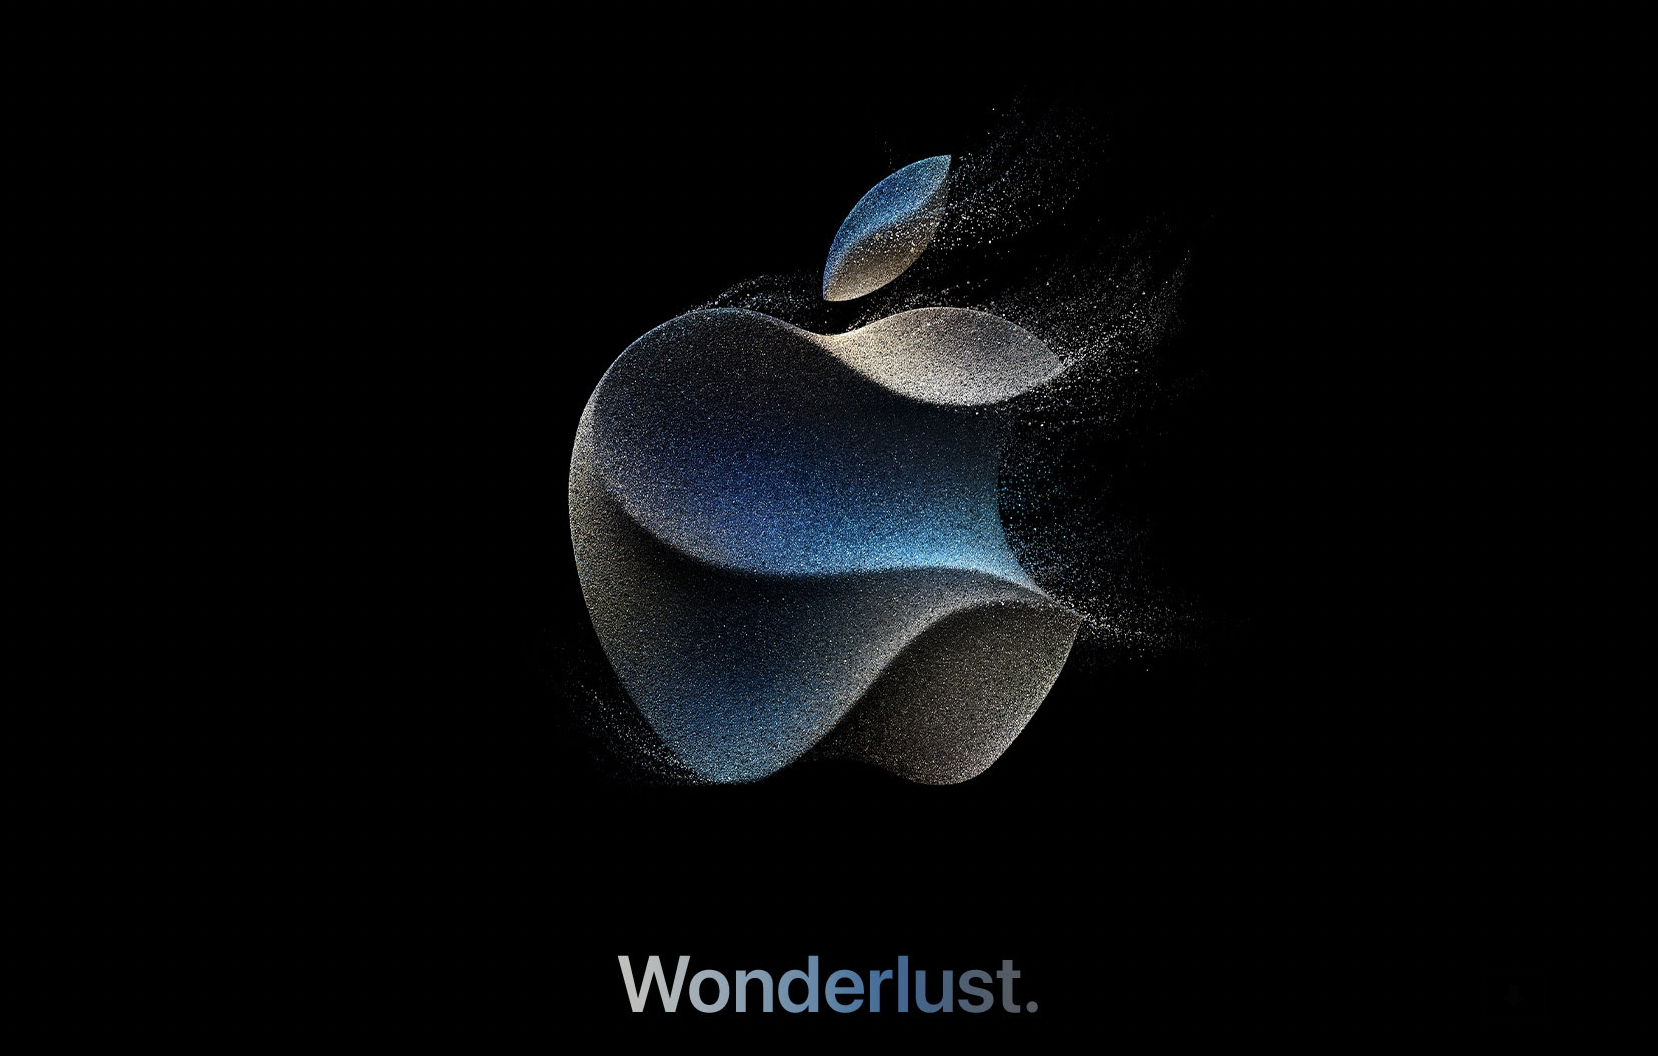 Apple Set to Unveil iPhone 15 with USB-C and iOS 17 at 'Wonderlust' Event